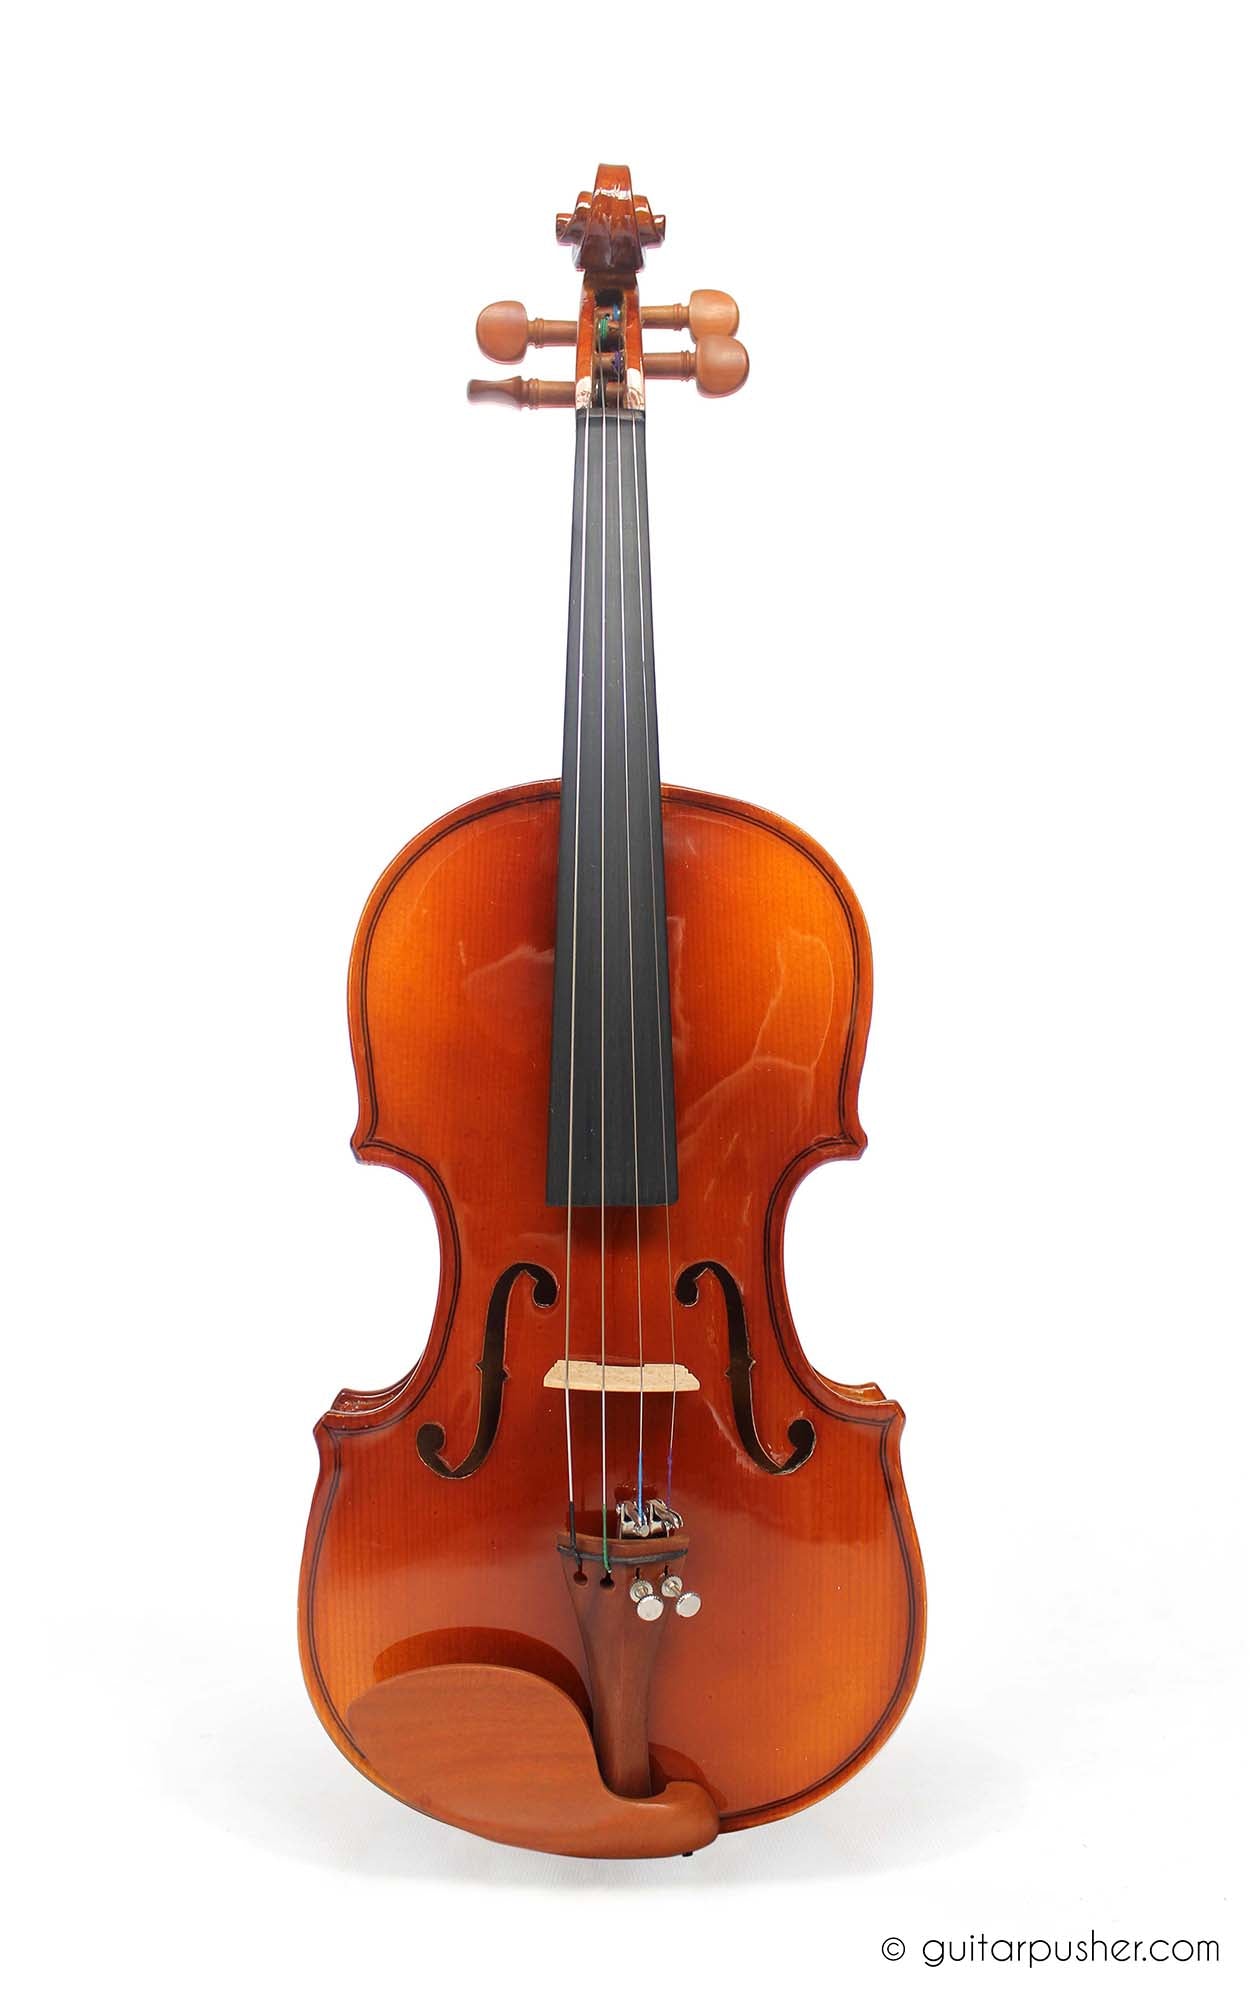 Trevino V401 1/4 Full Solid Wood Violin with Case